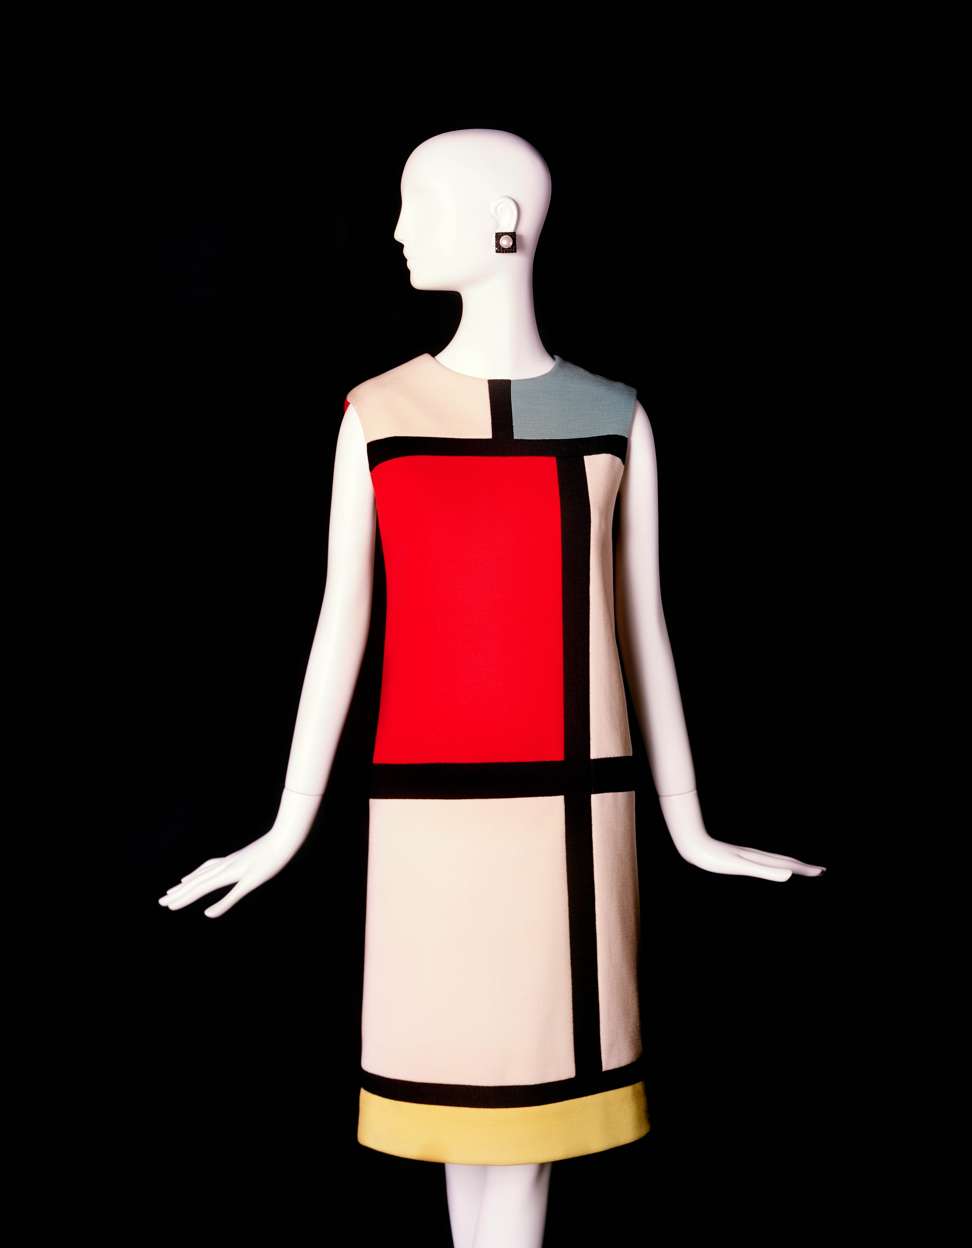 The Mondrian Dress, designed by Yves Saint Laurent, is based on a famous Mondrian painting